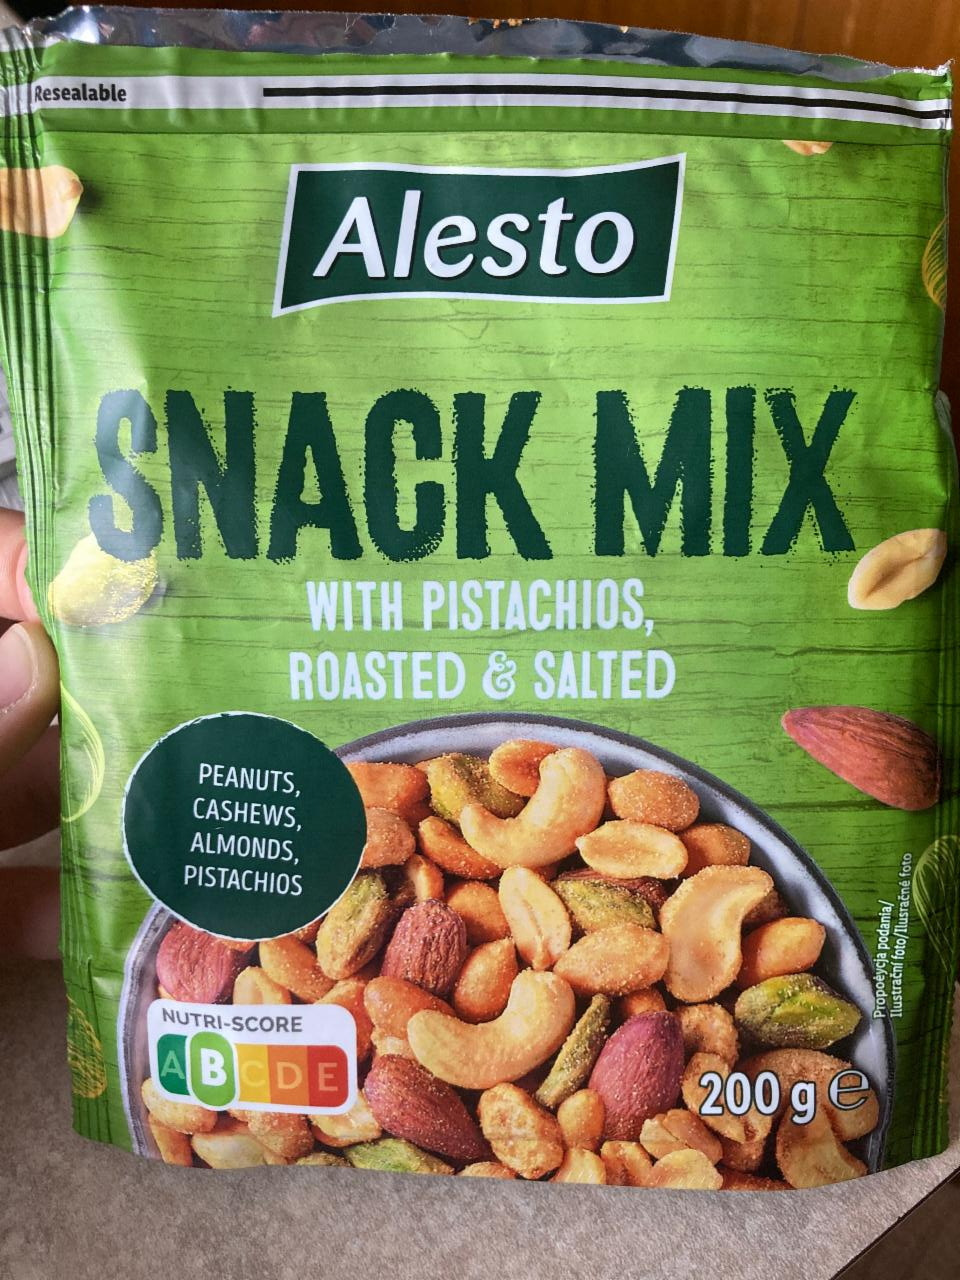 Фото - Snack Mix with pistachios, roasted & salted Alesto